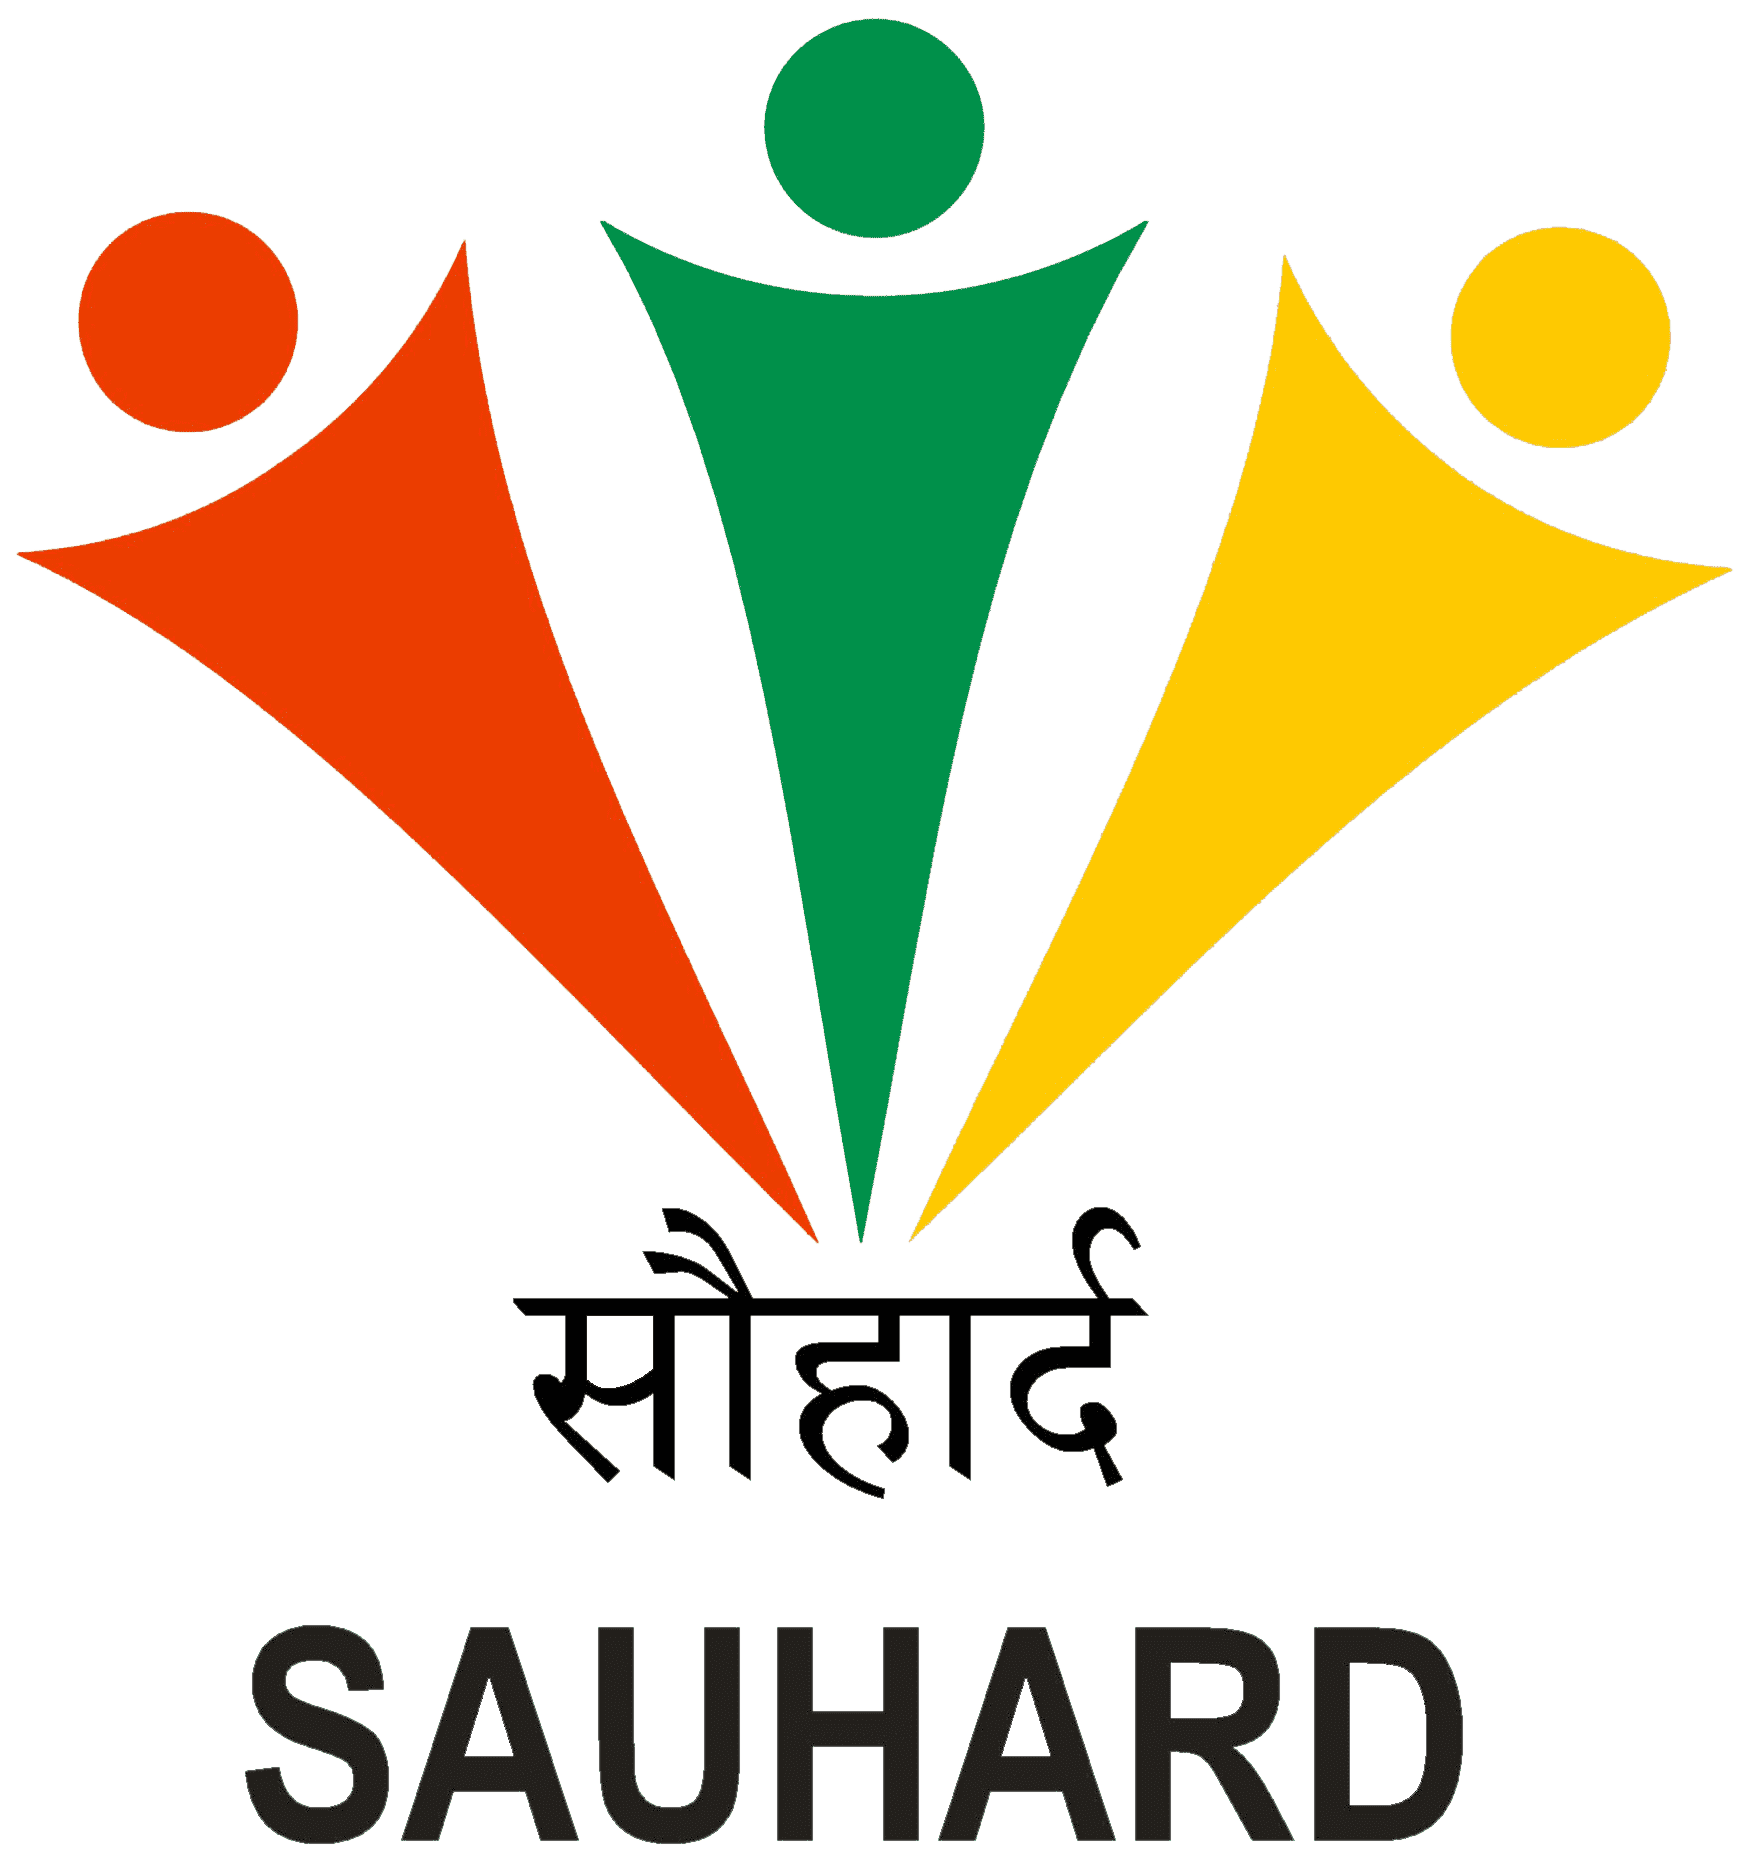 Sauhard: Empowering Youth for Positive Change